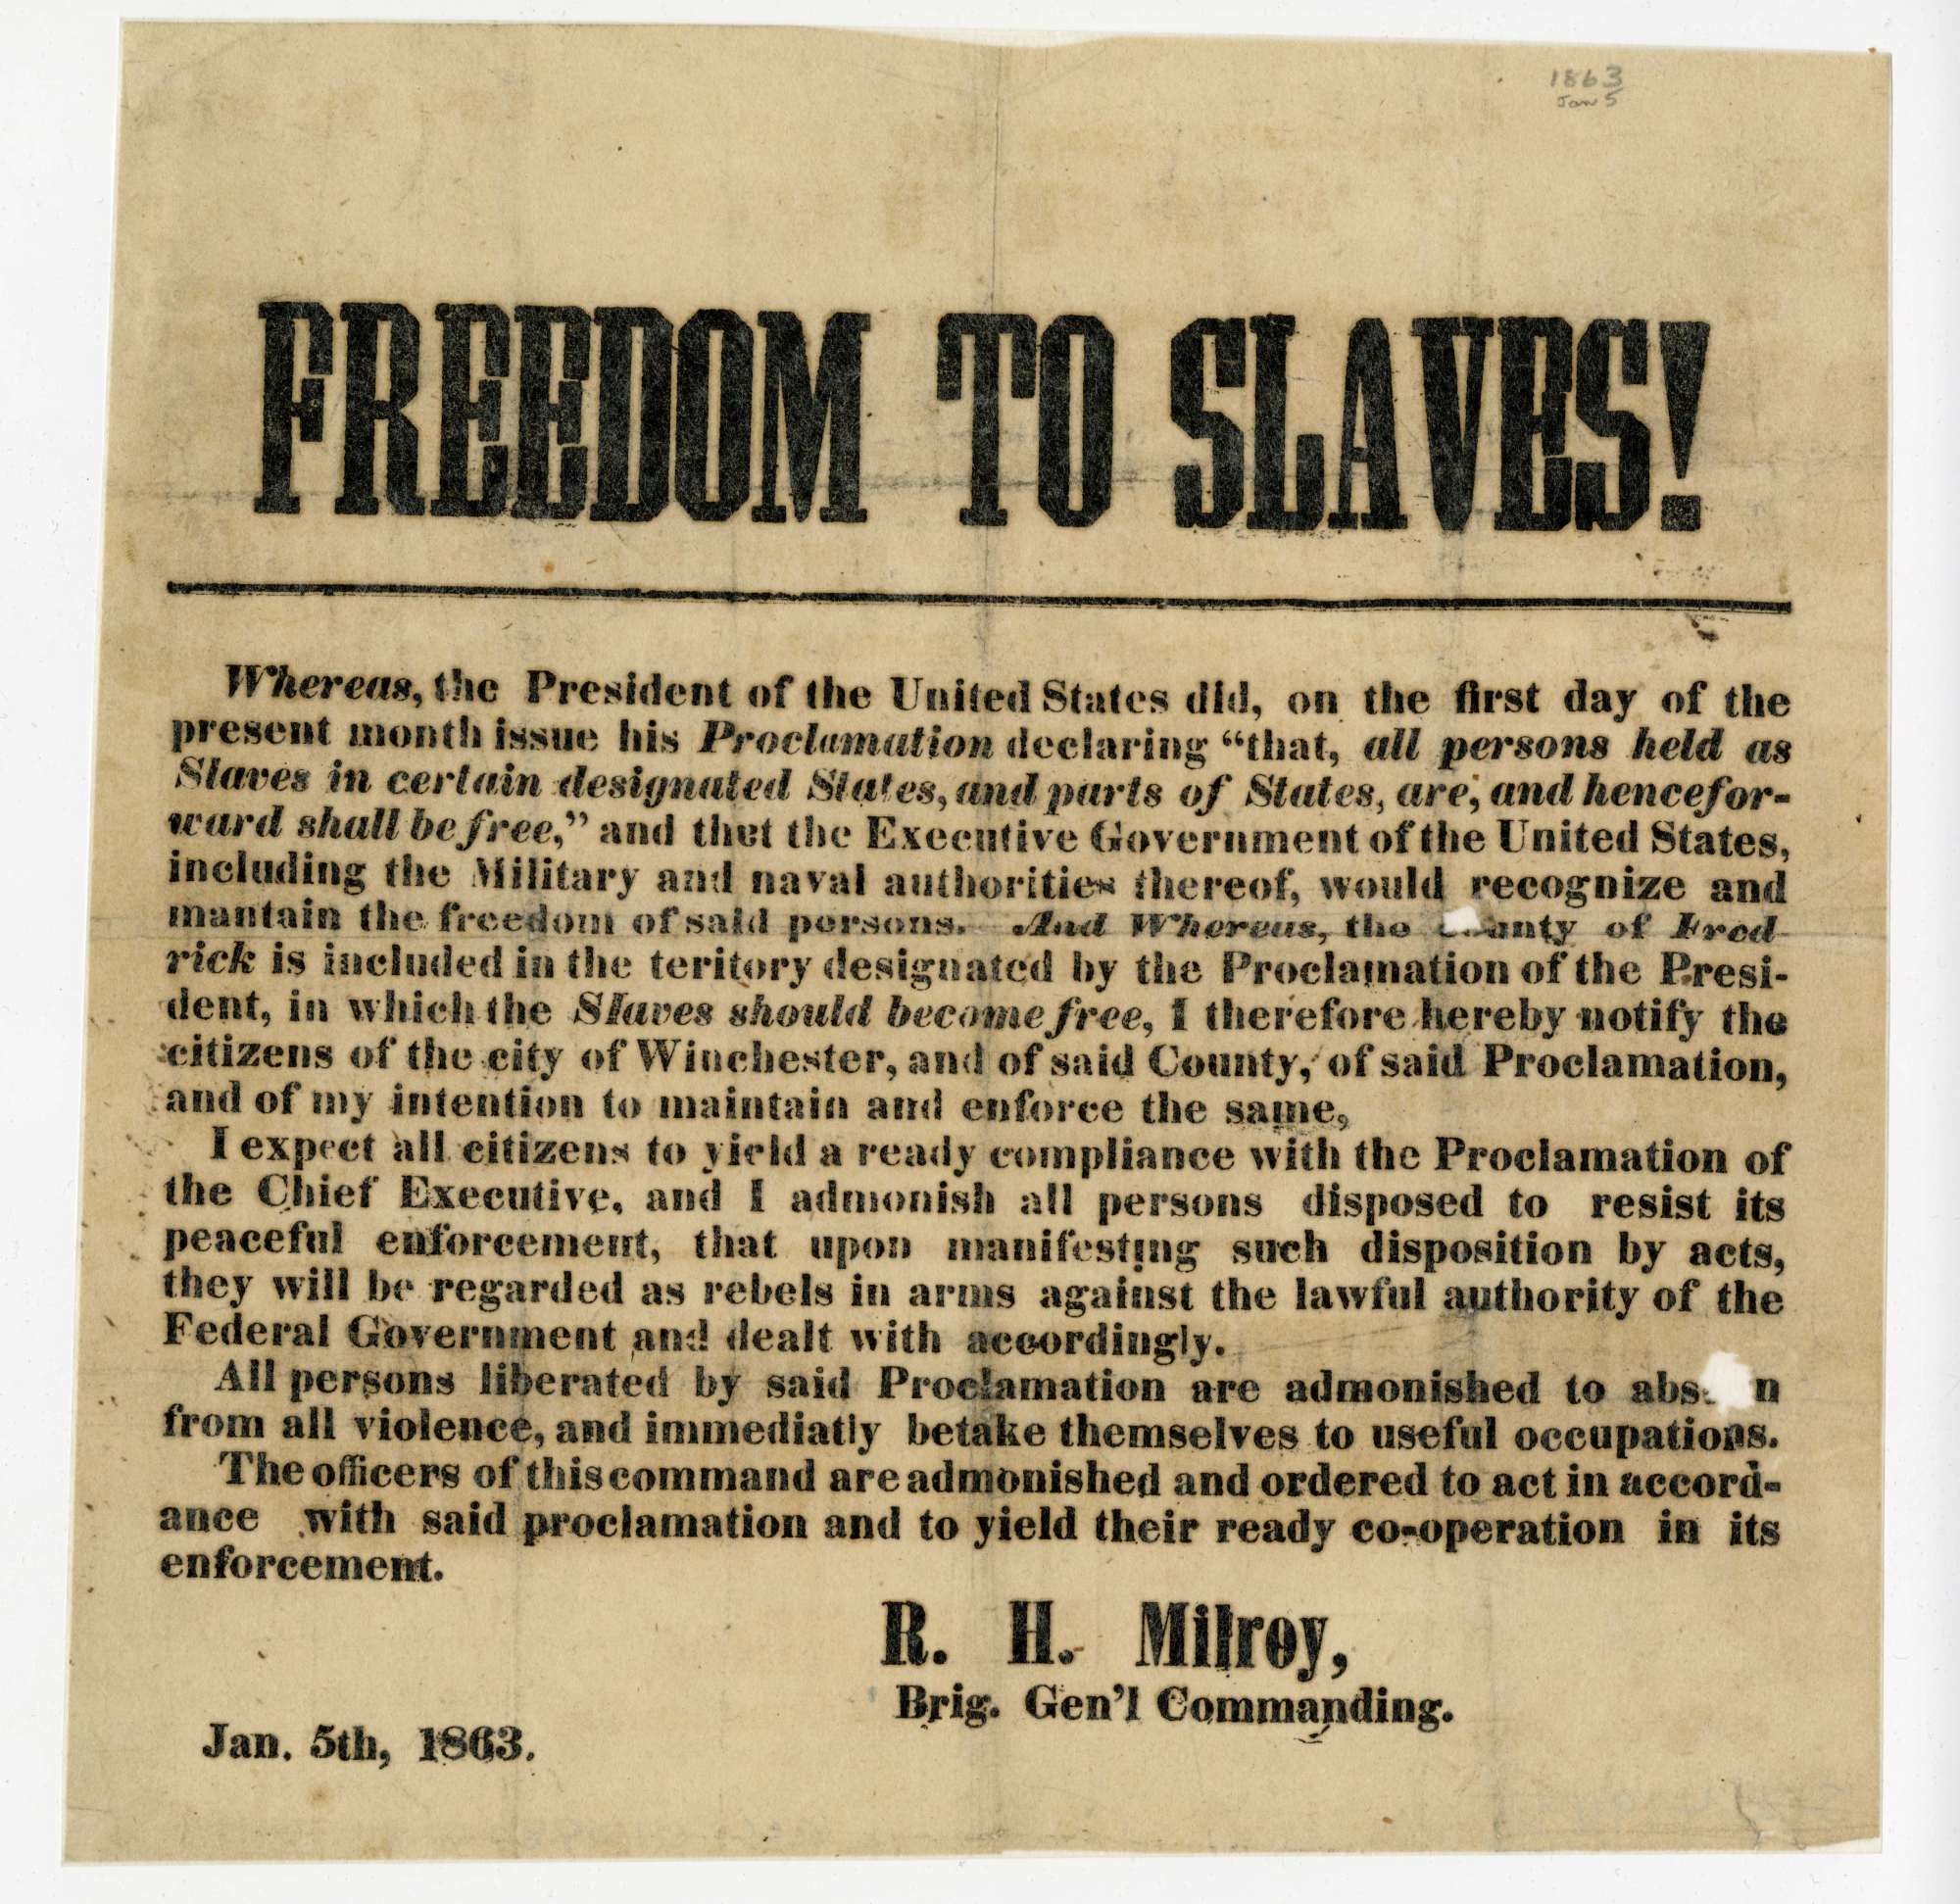 A weathered paper notice from 1863 proclaims freedom to slaves.